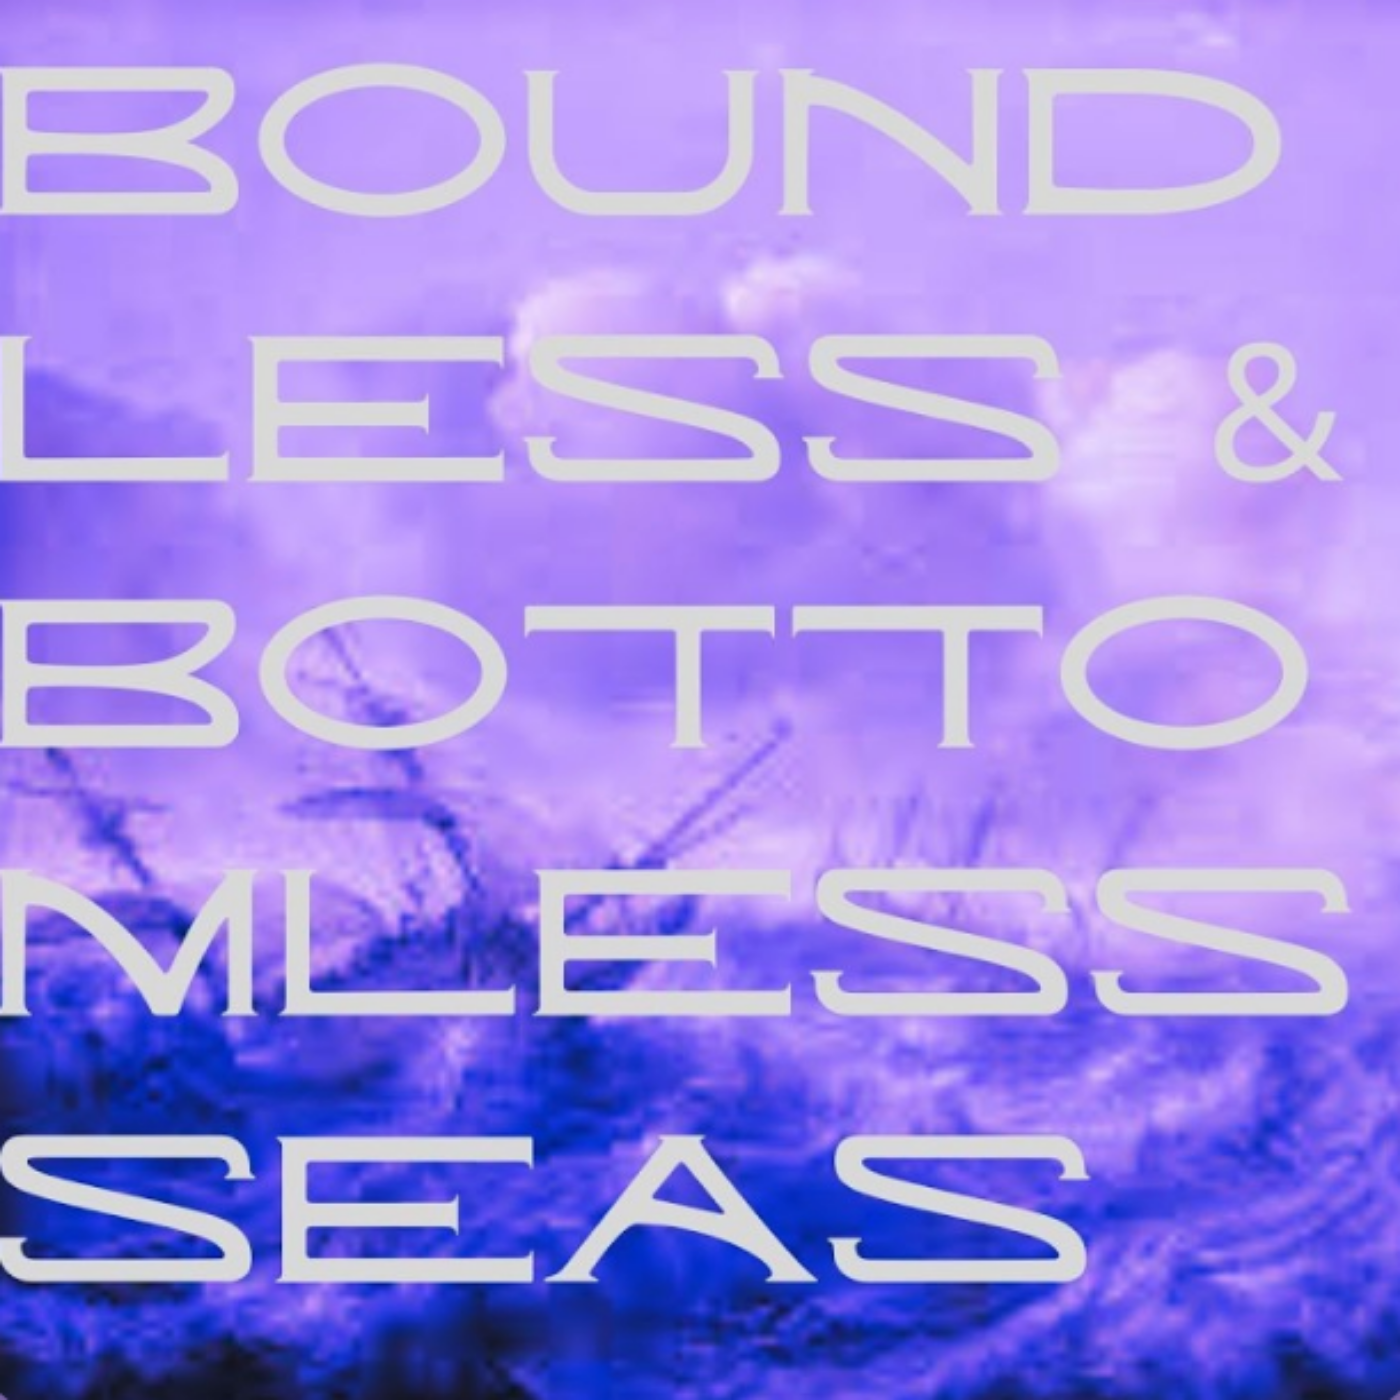 Boundless and Bottomless Seas: "The Fourth Political Theory" by Aleksandr Dugin (Episode 5)